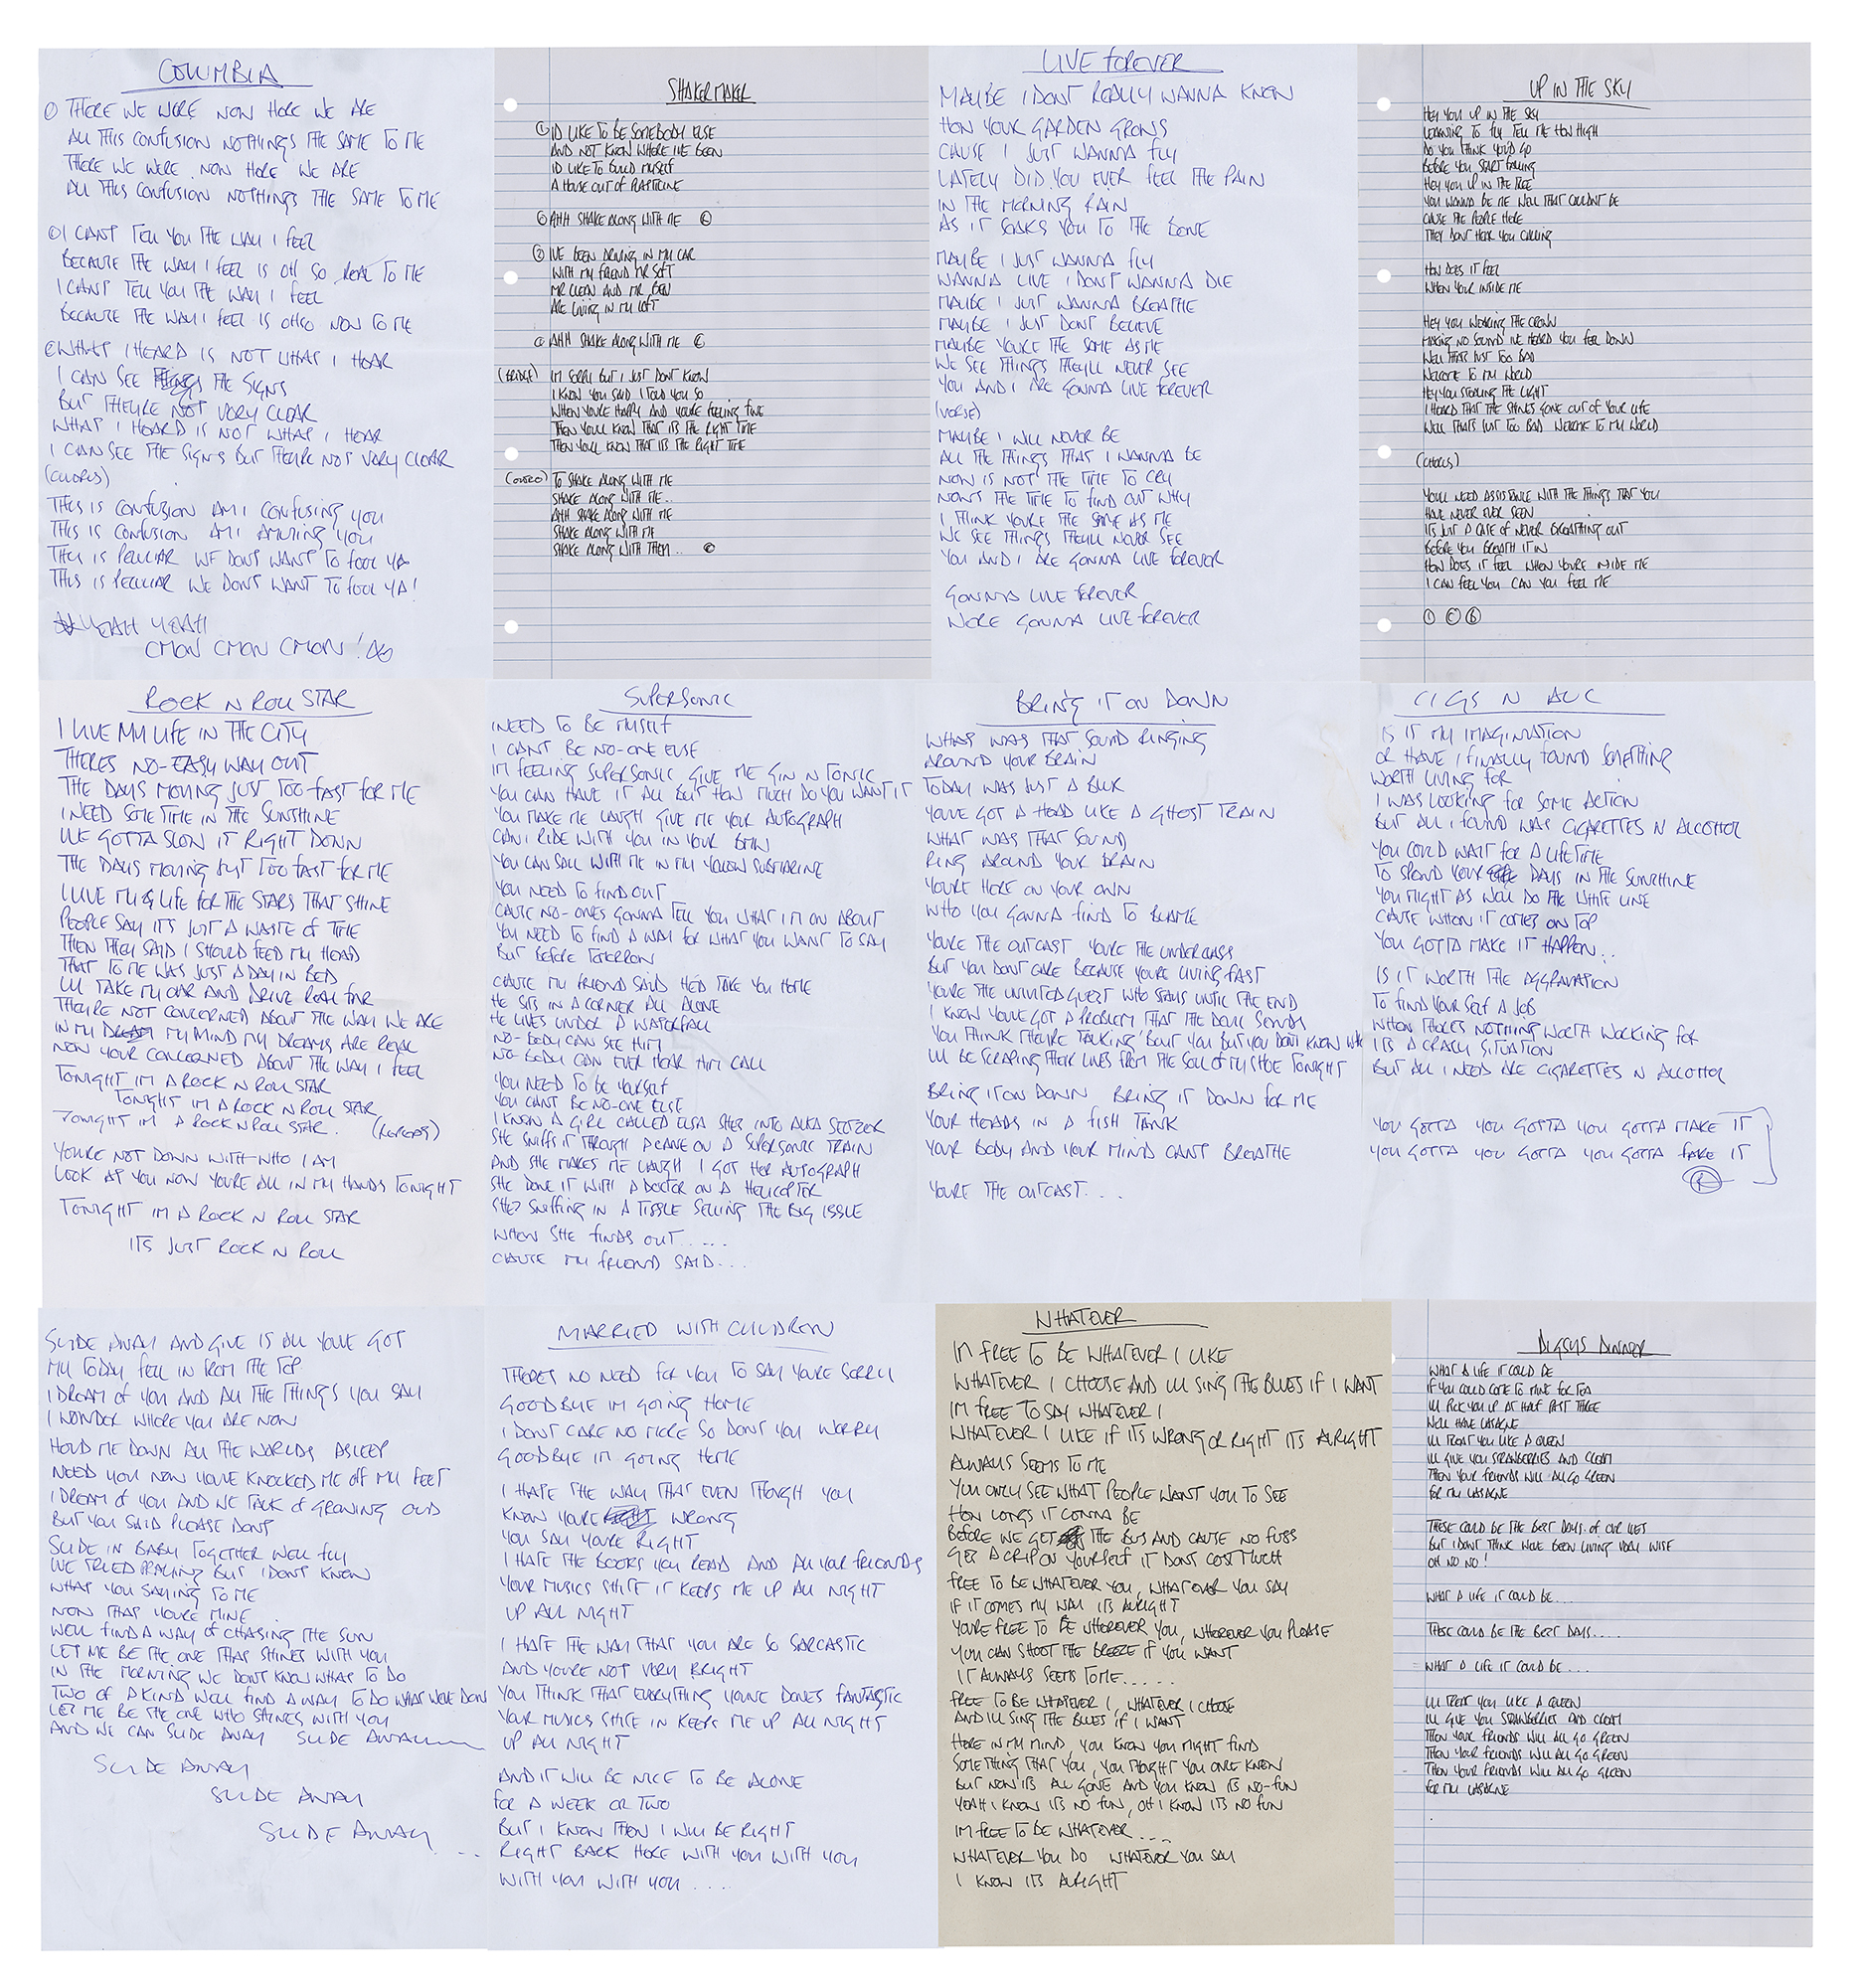 Lot #628 Oasis: Noel Gallagher Handwritten Lyrics (13) for Definitely Maybe, with CD Signed by the Gallagher Brothers - Image 1